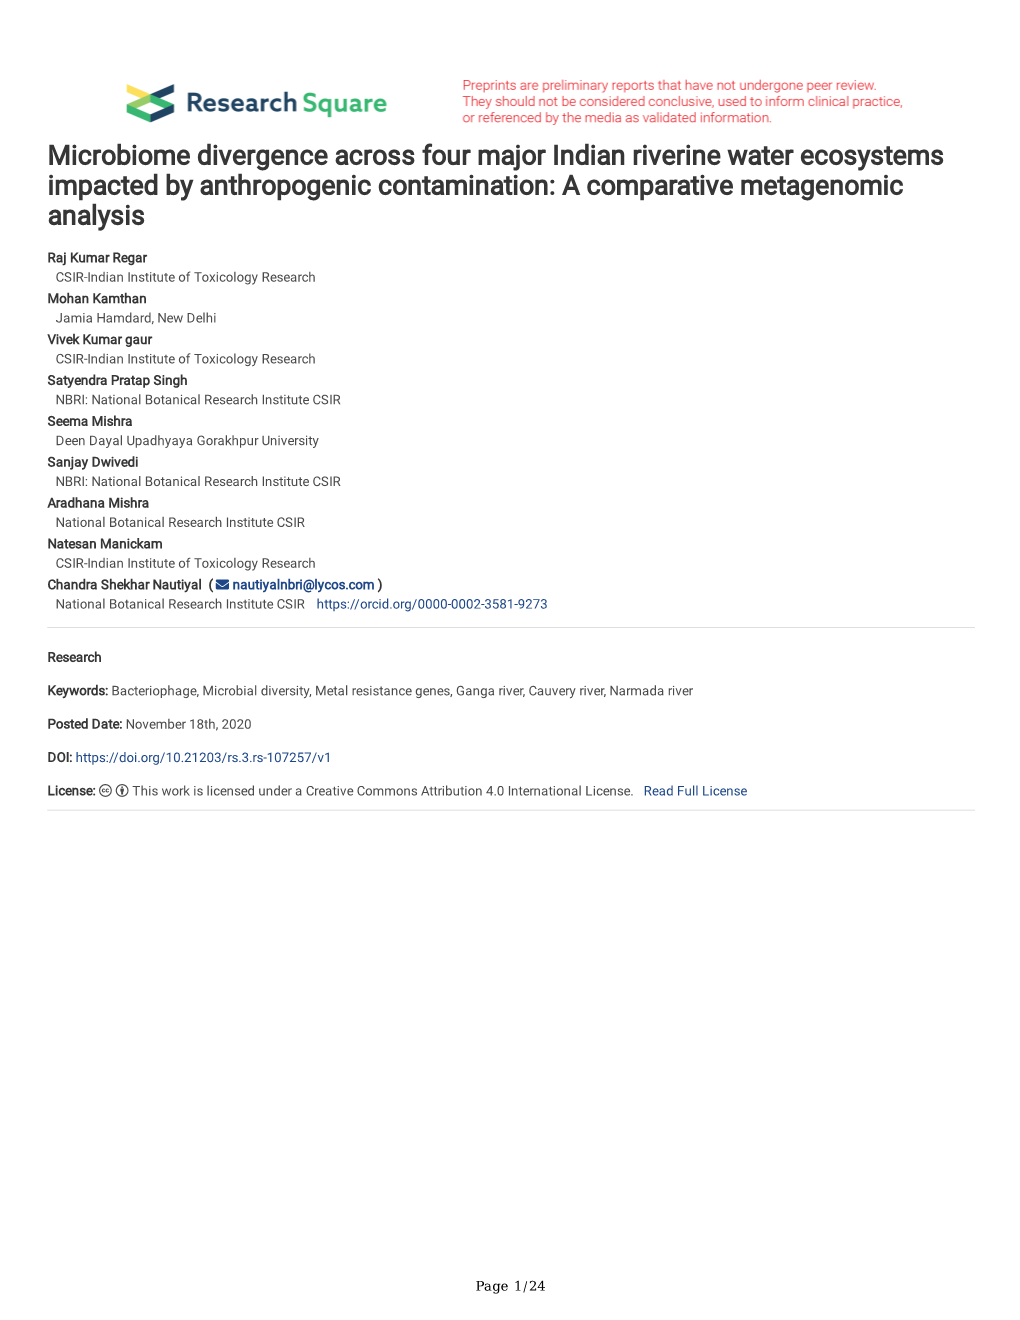 Microbiome Divergence Across Four Major Indian Riverine Water Ecosystems Impacted by Anthropogenic Contamination: a Comparative Metagenomic Analysis